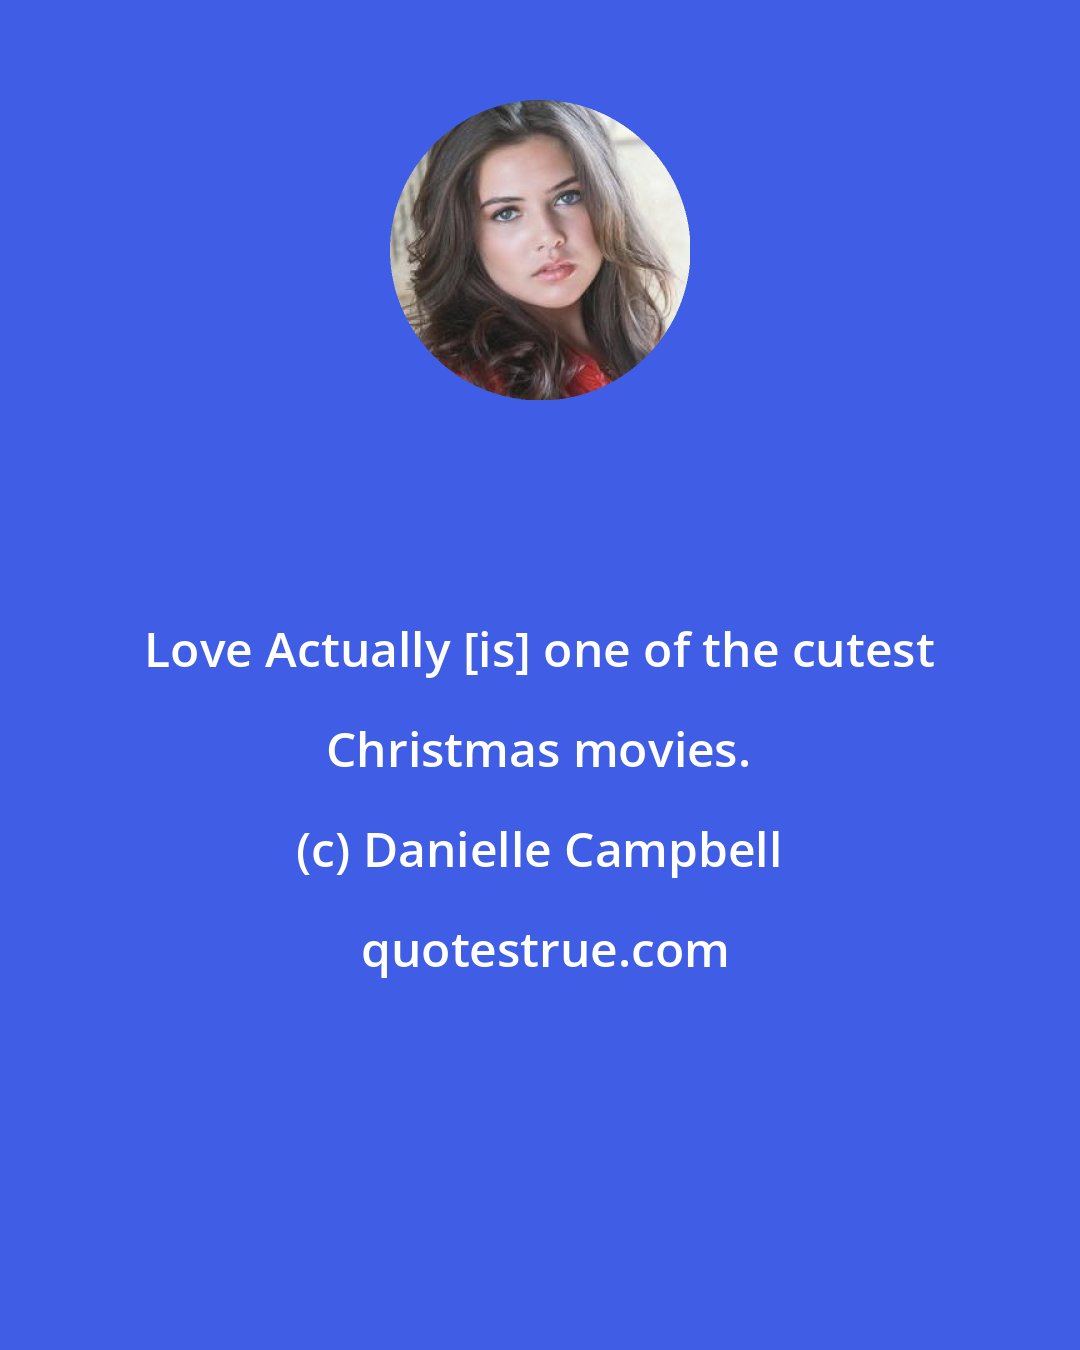 Danielle Campbell: Love Actually [is] one of the cutest Christmas movies.